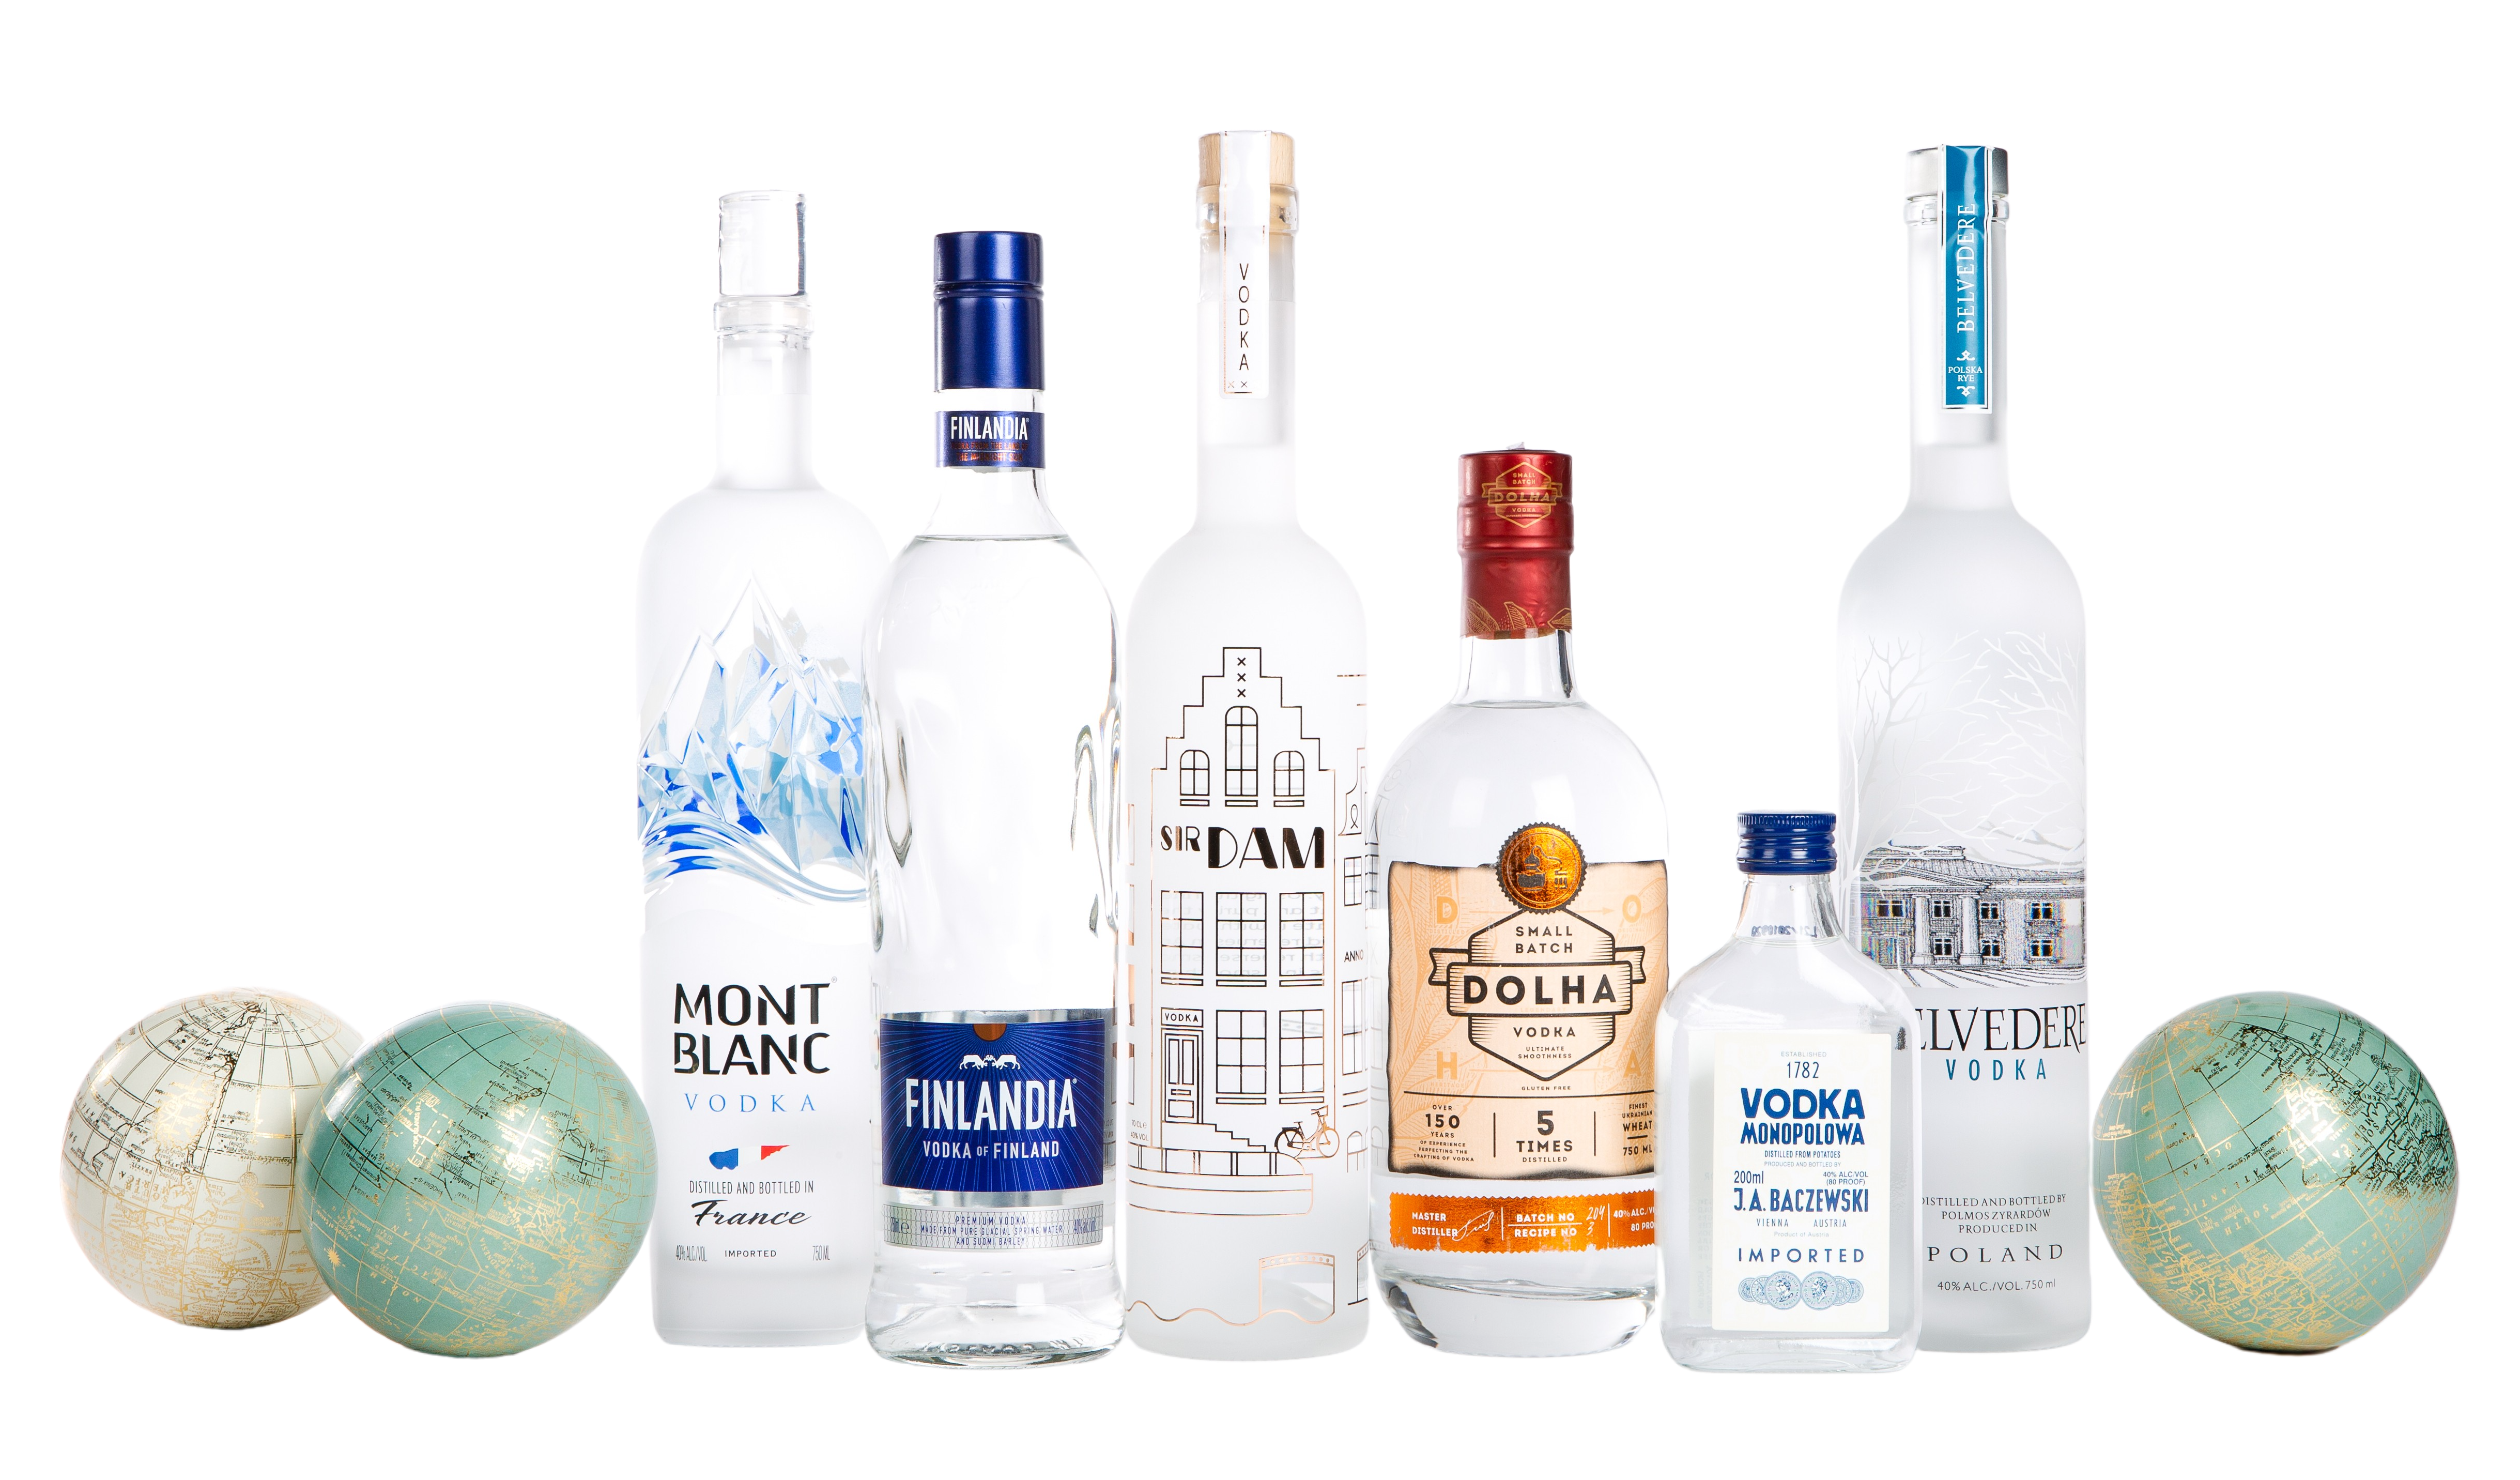 Belvedere Vodka - The Flavor Collection : Buy from World's Best